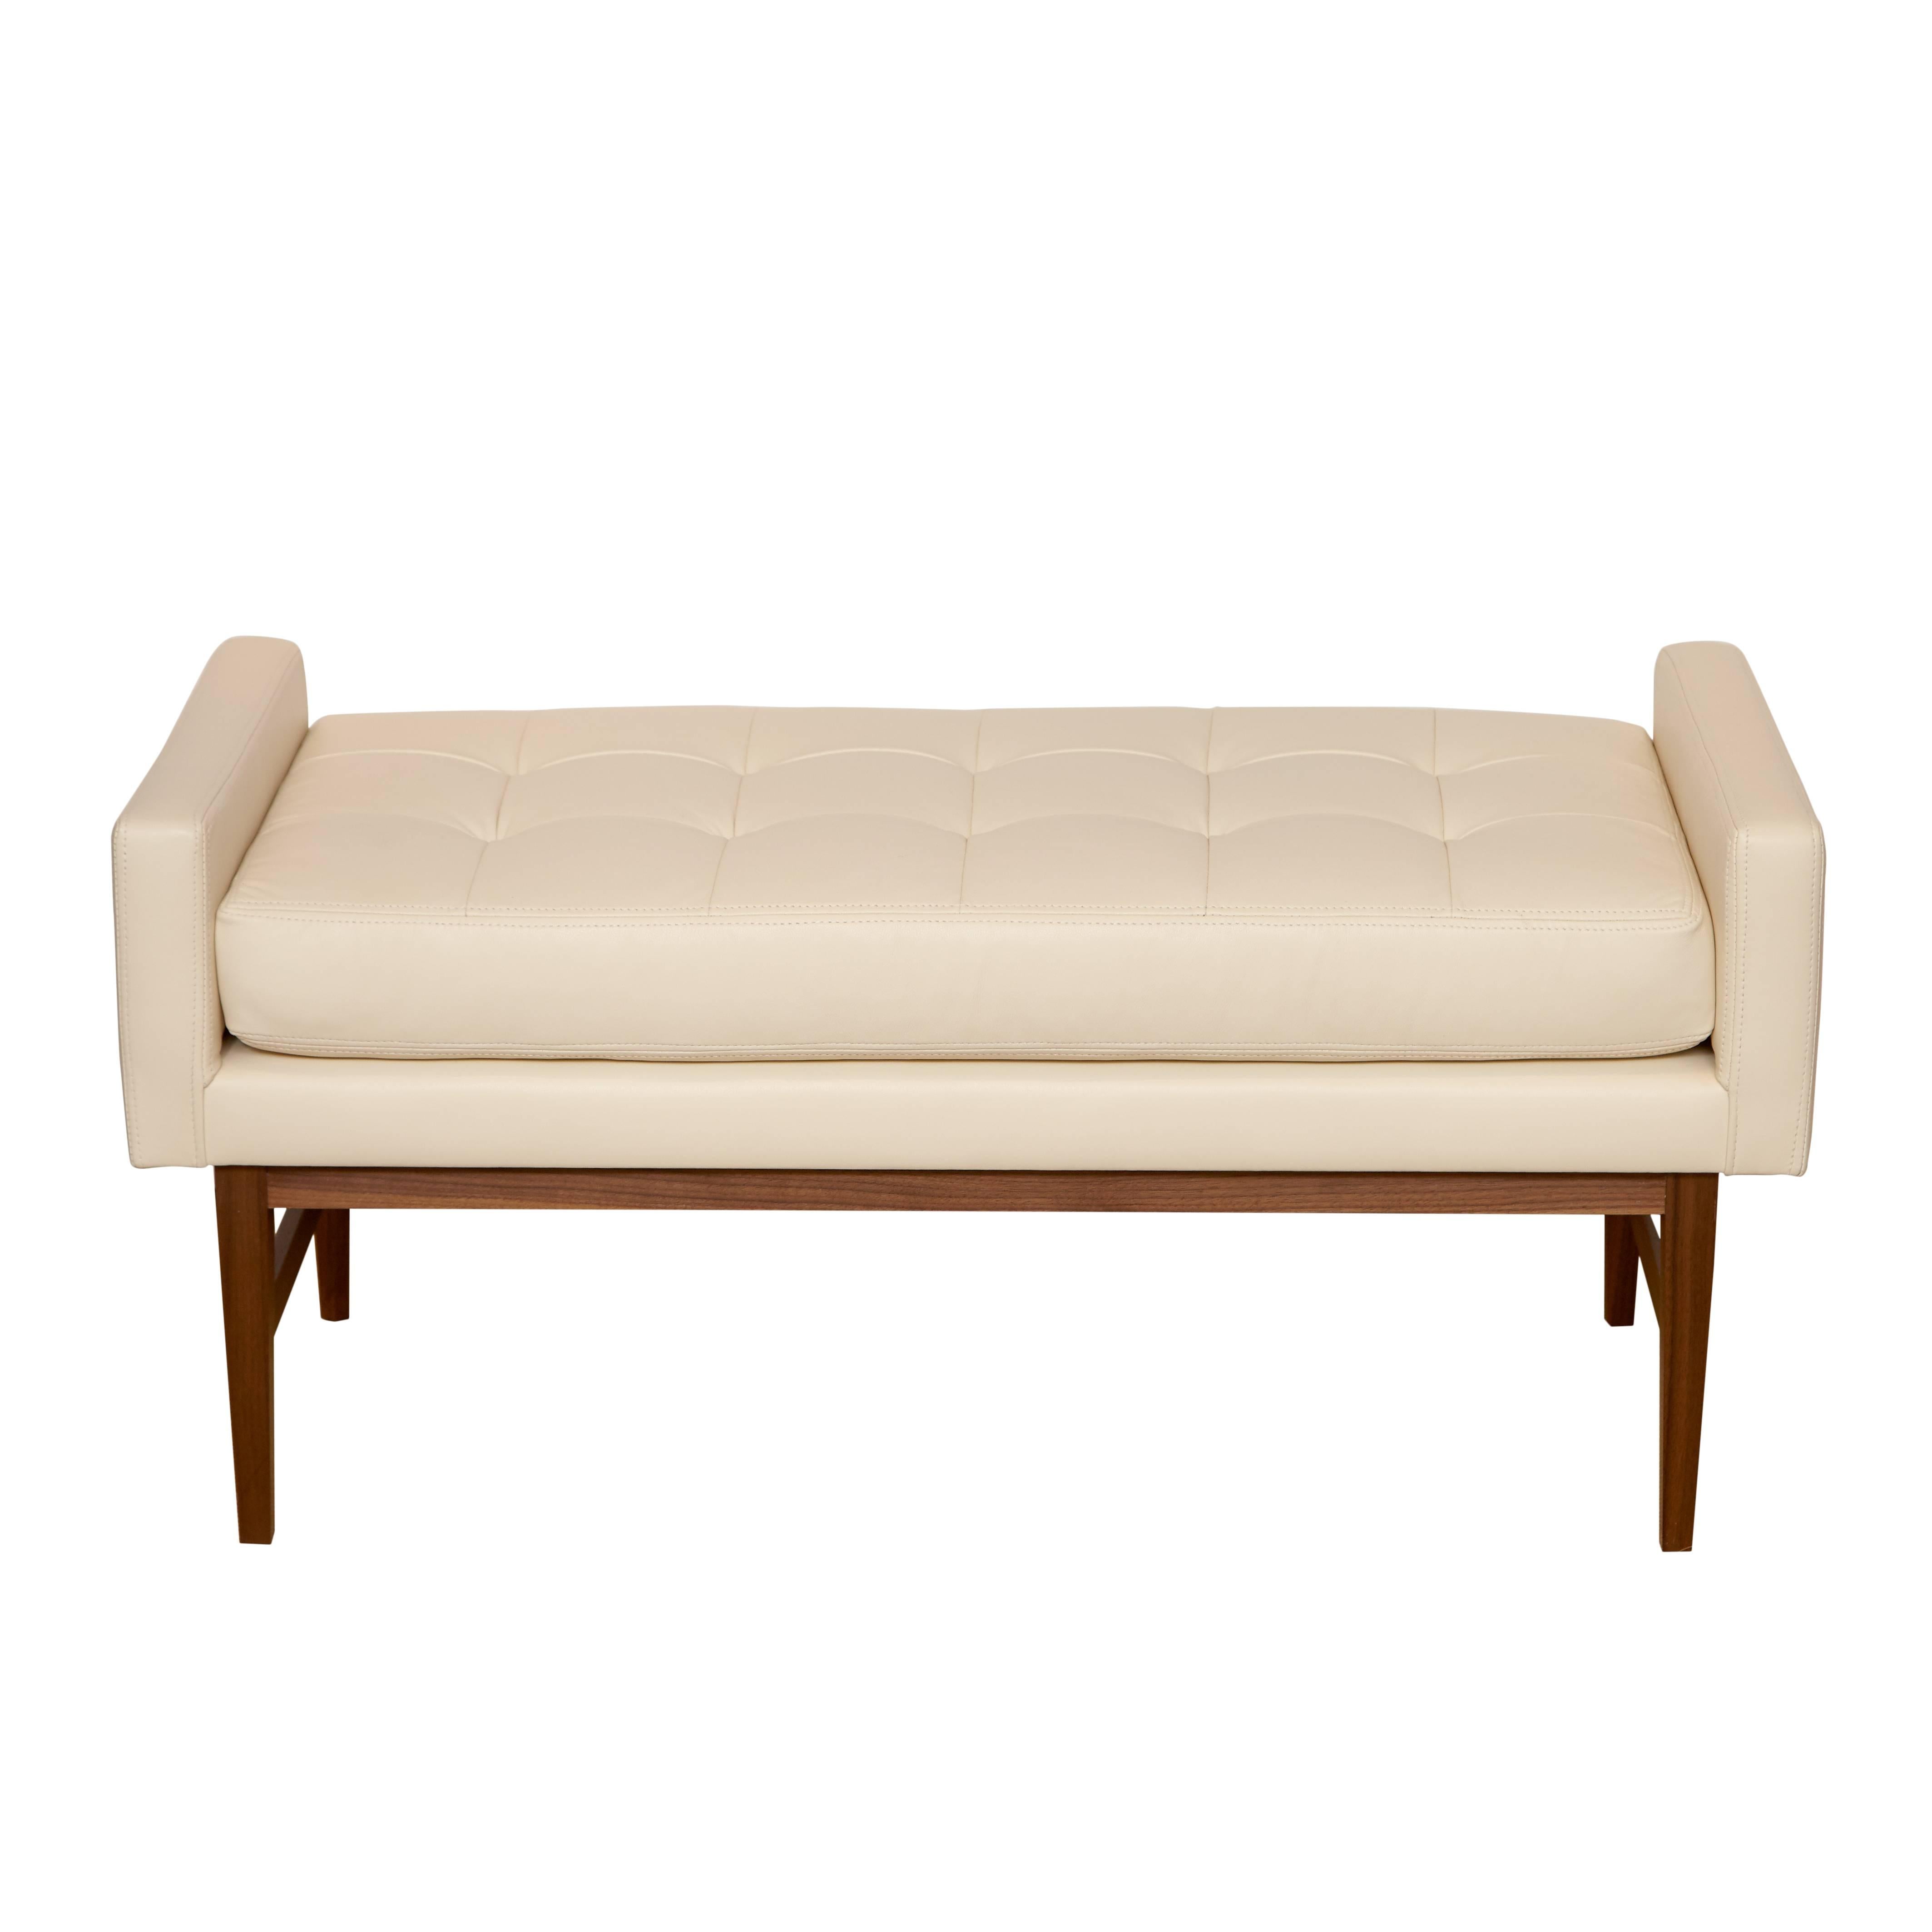 American Bailey Tufted Bench For Sale